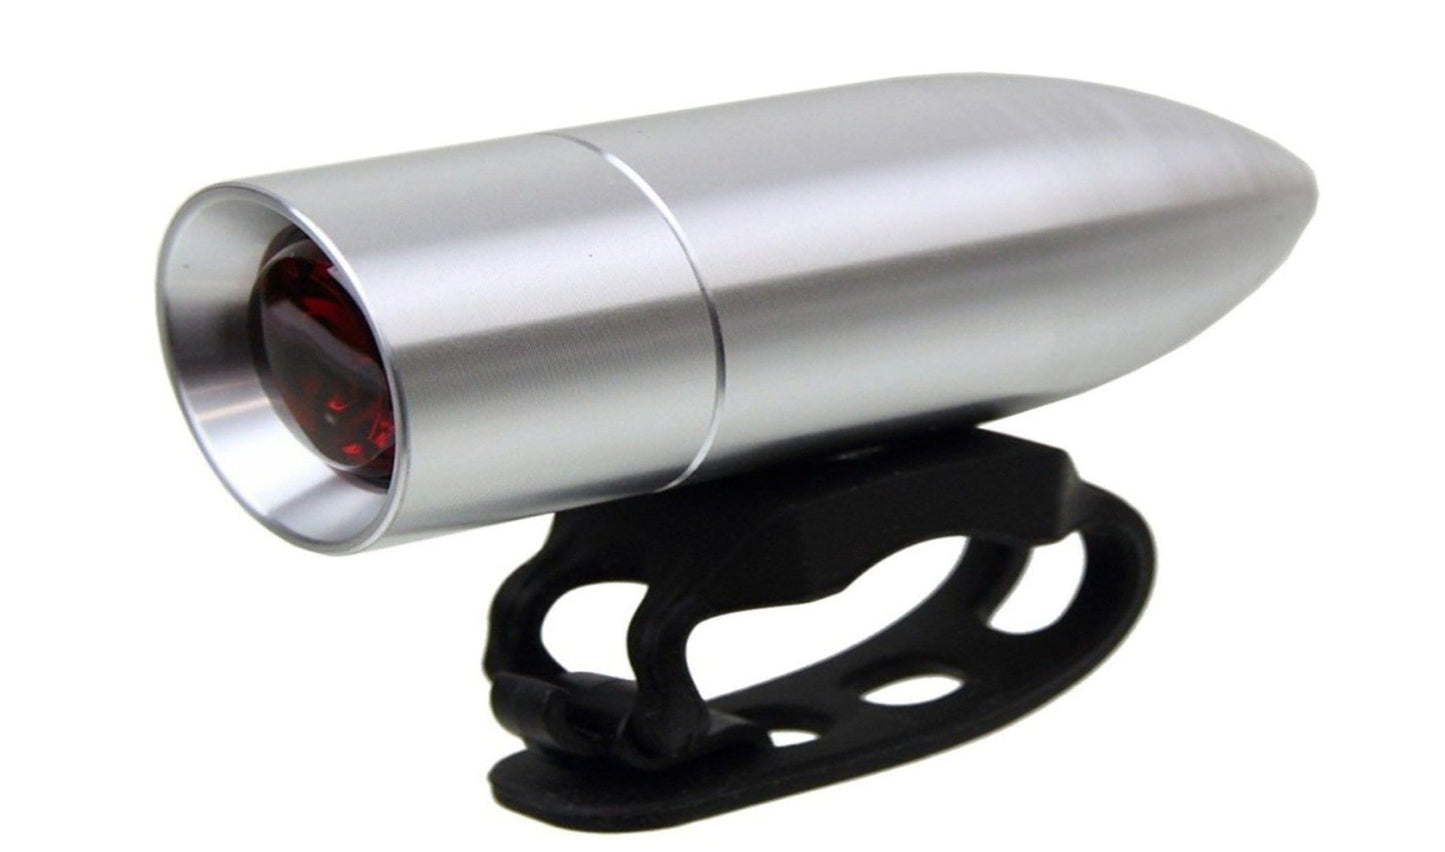 Rindow bullet bicycle light with rubber strap mount attached